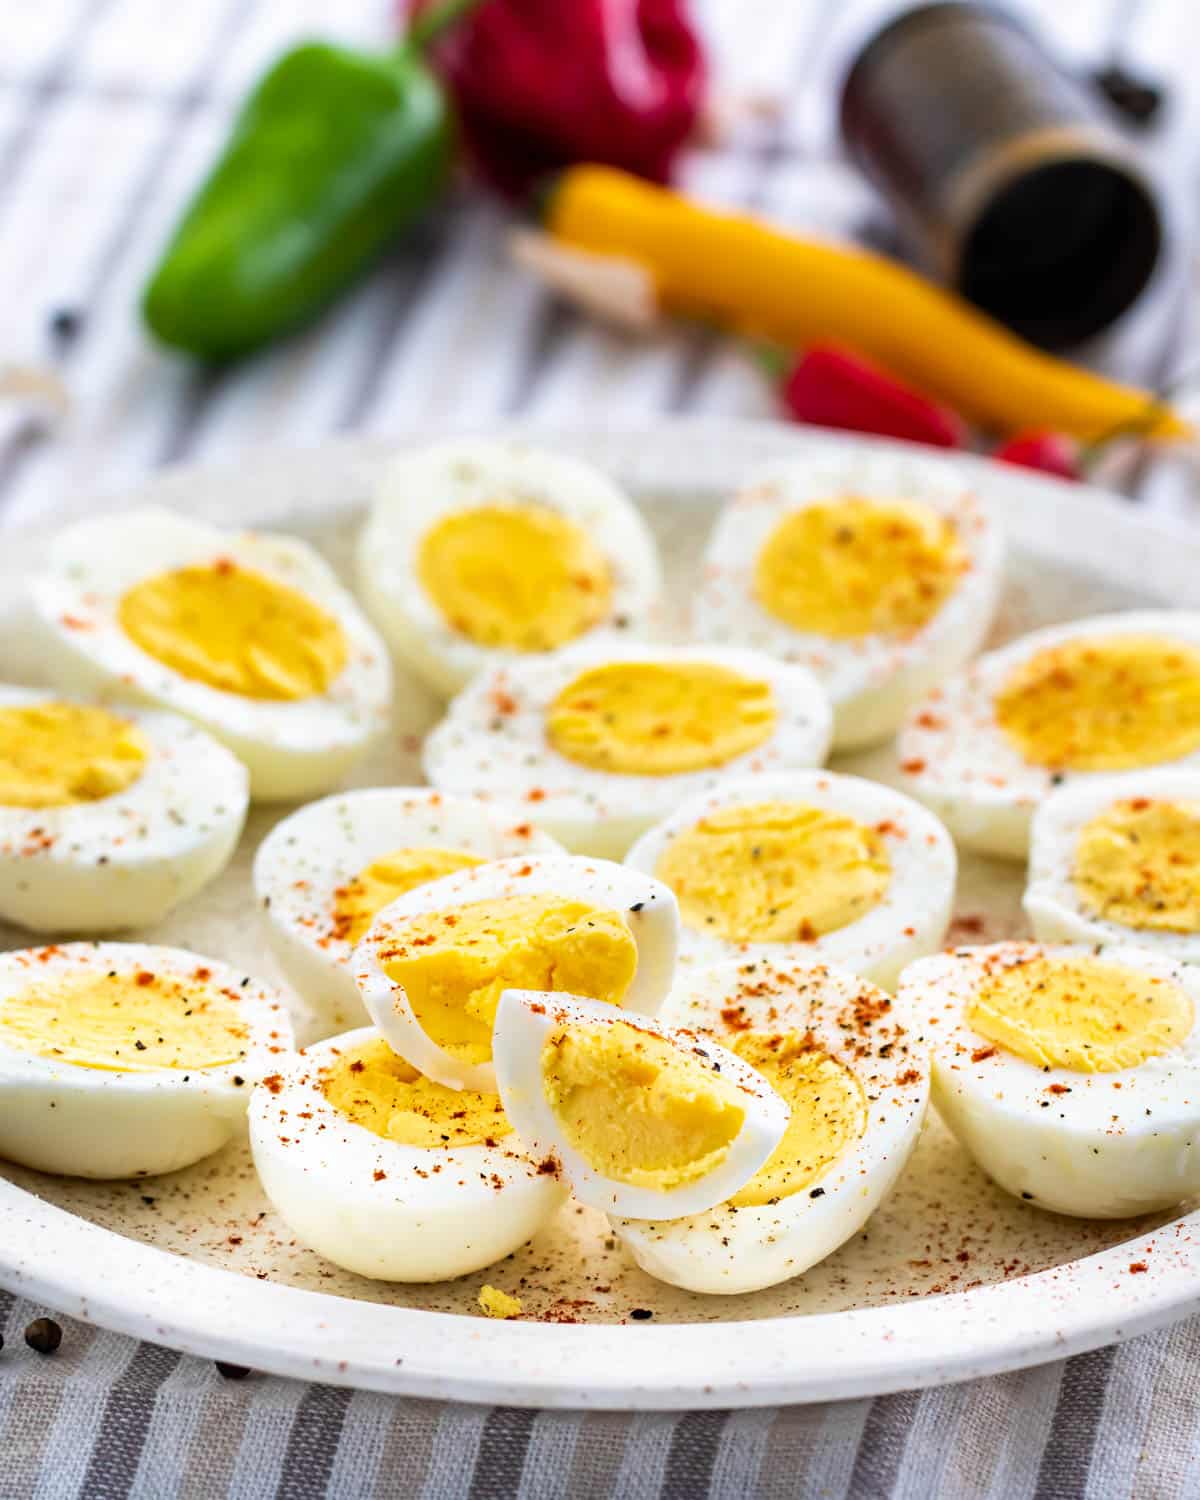 Satisfyingly Simple: The Art Of Boiling Eggs To Perfection